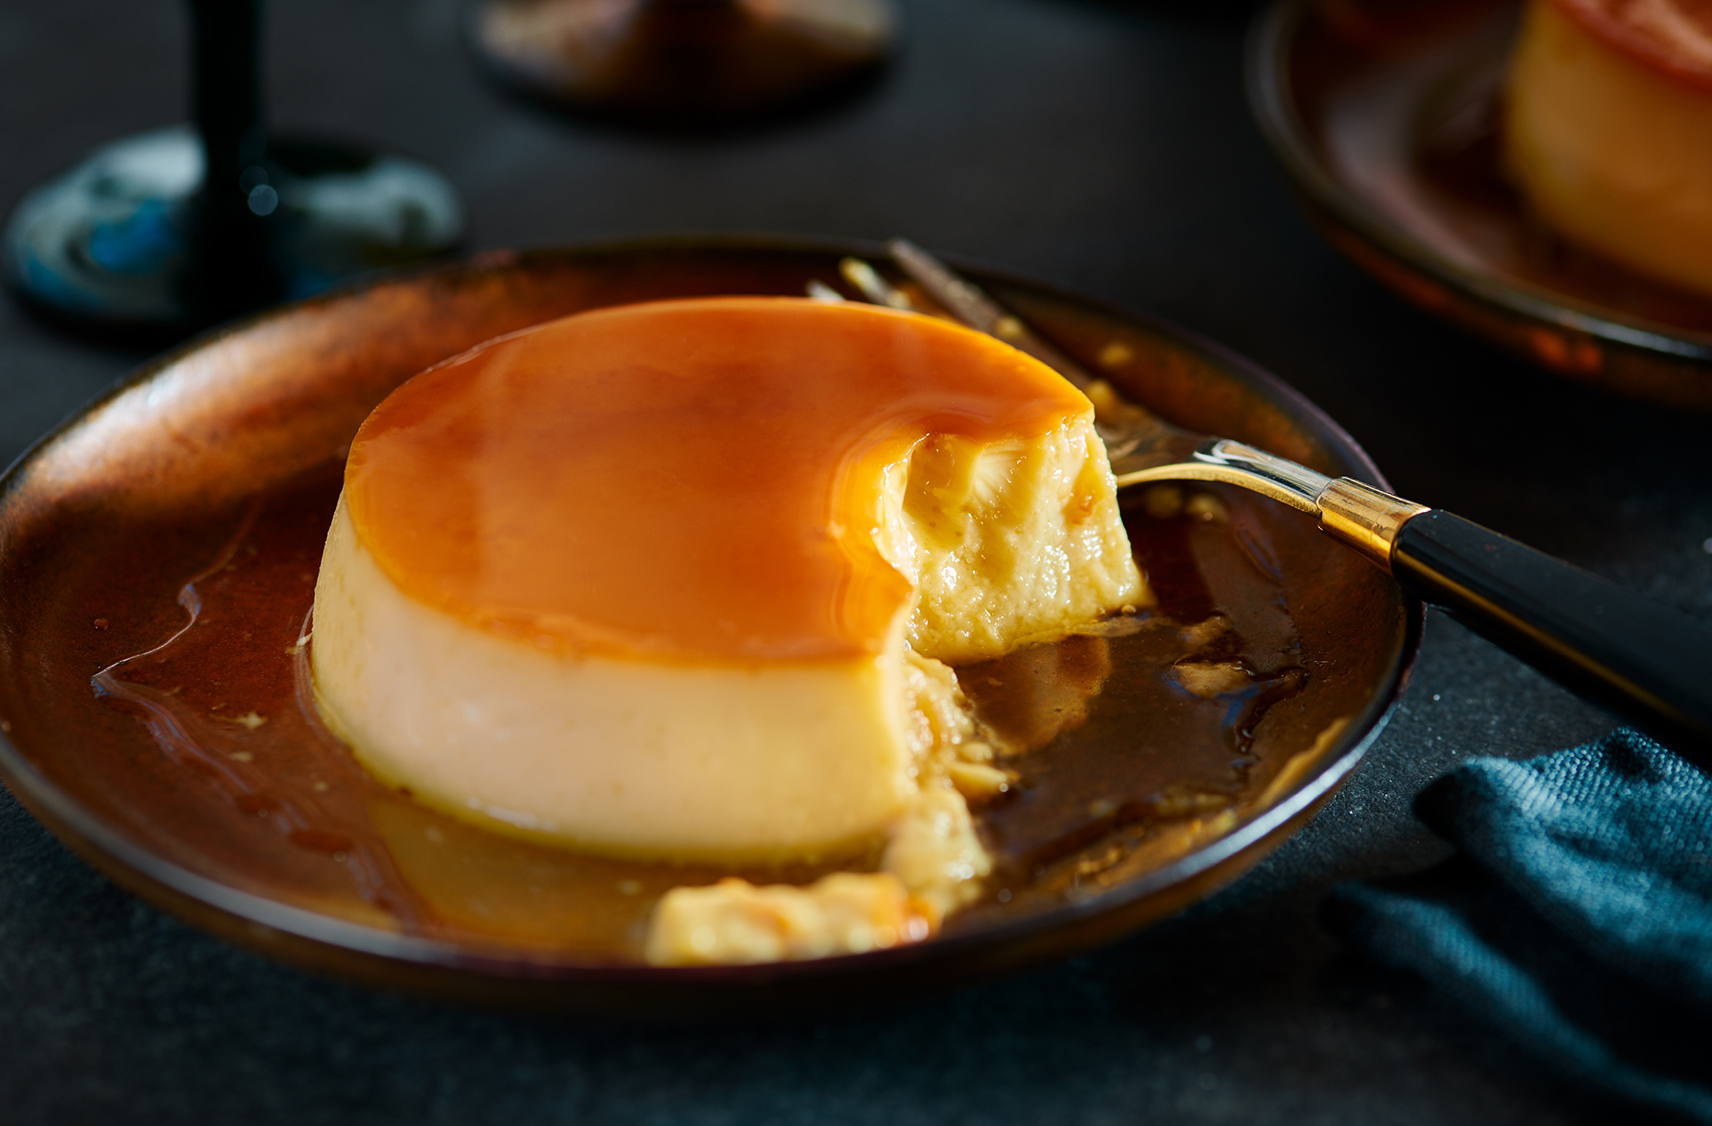 A crème caramel dessert on a plate next to a fork with 1 bite missing